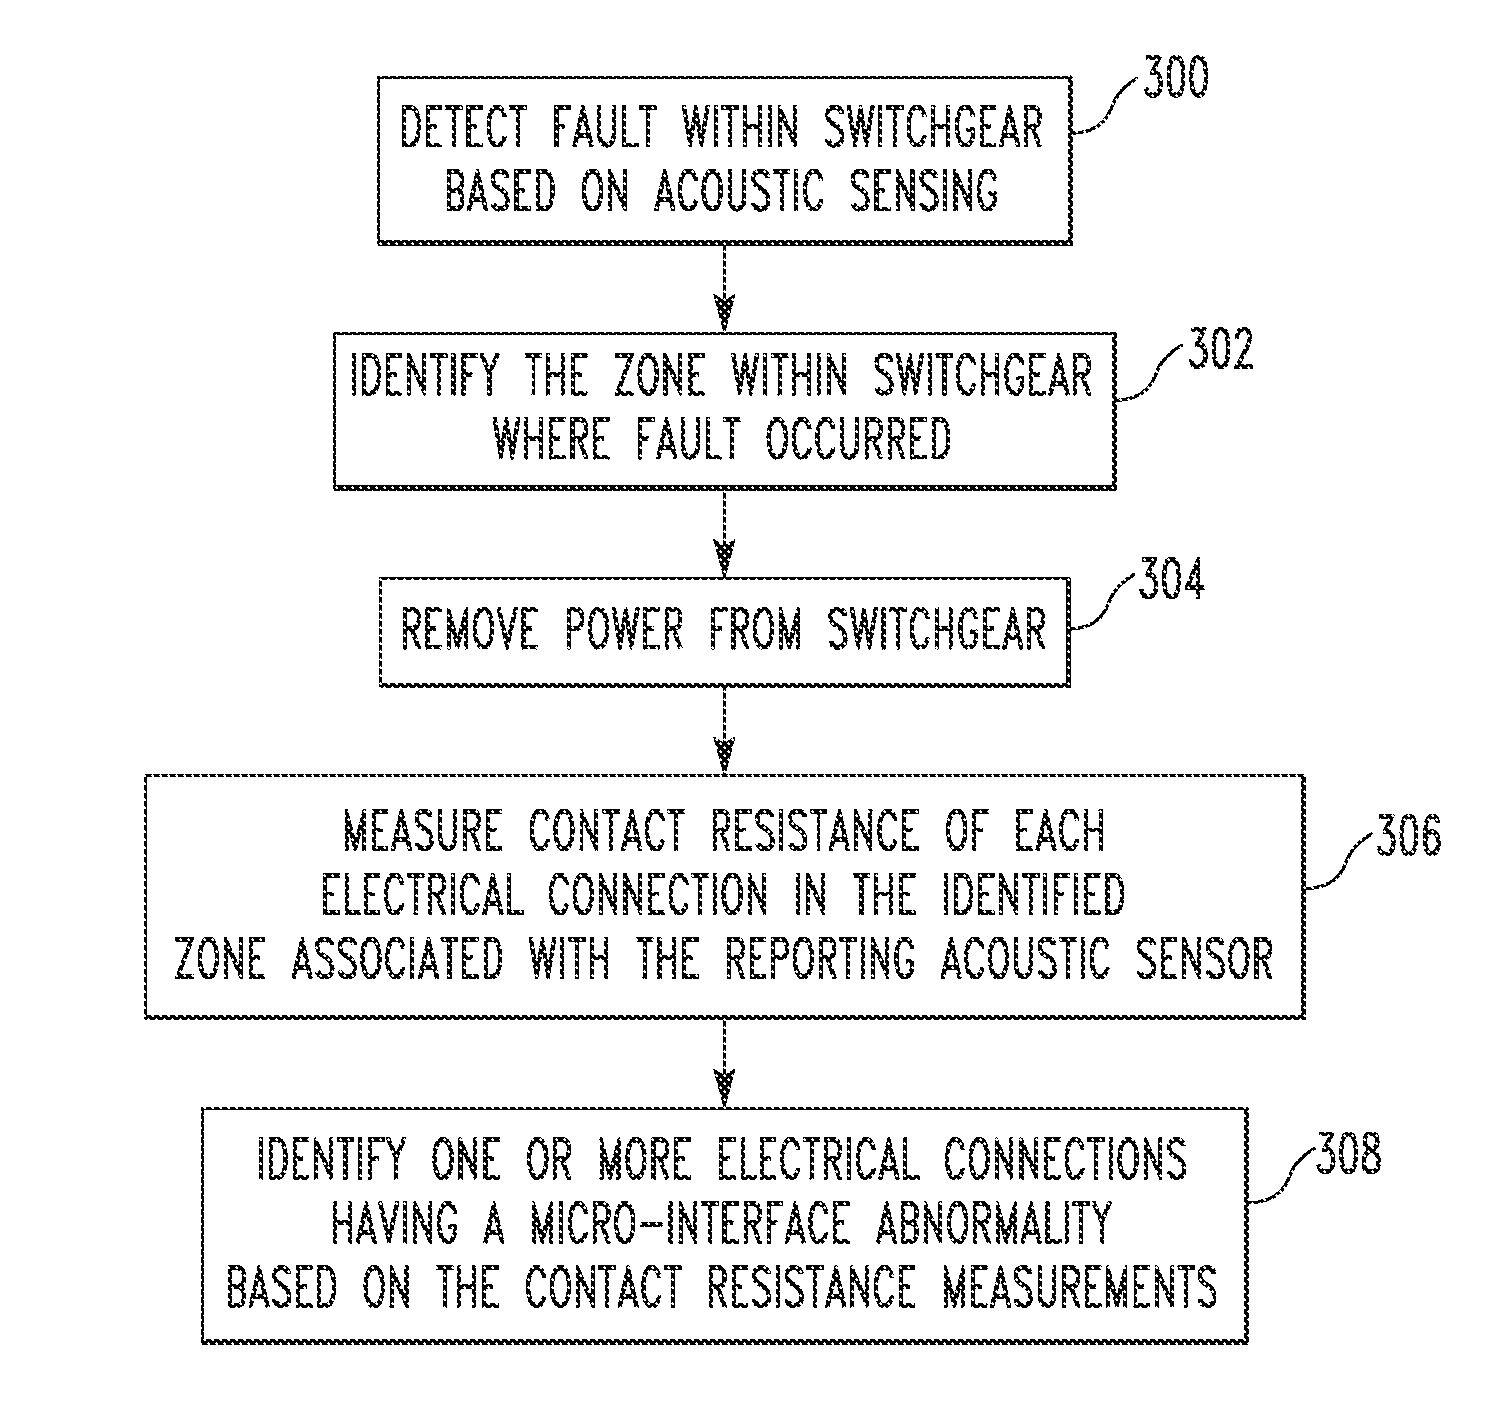 Detection and location of electrical connections having a micro-interface abnormality in an electrical system